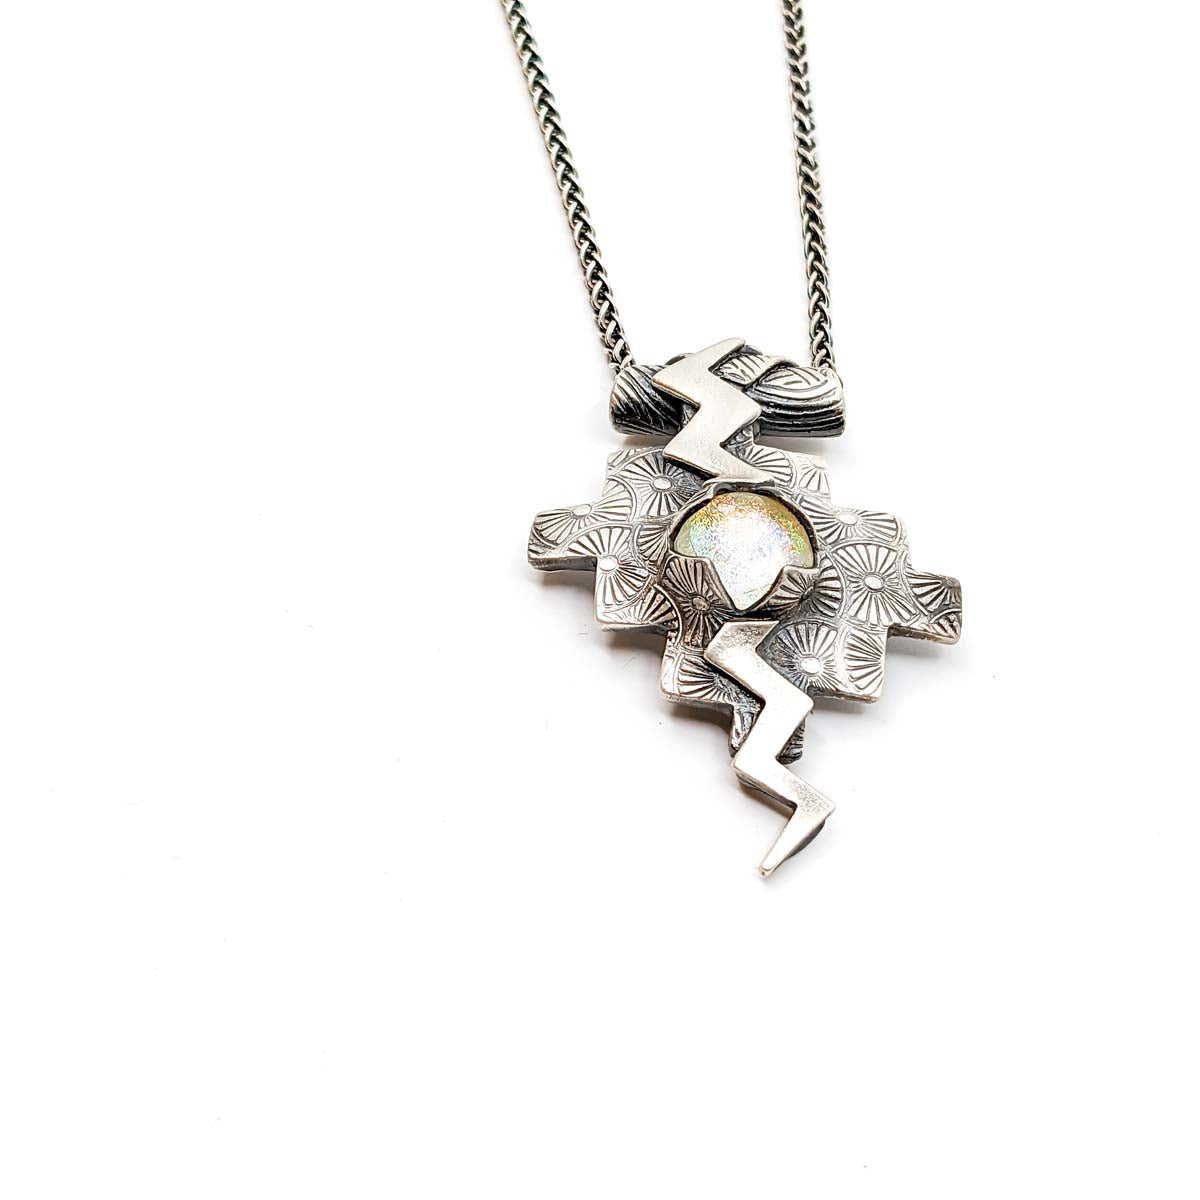 Storm (with Glass and Lightning) Necklace